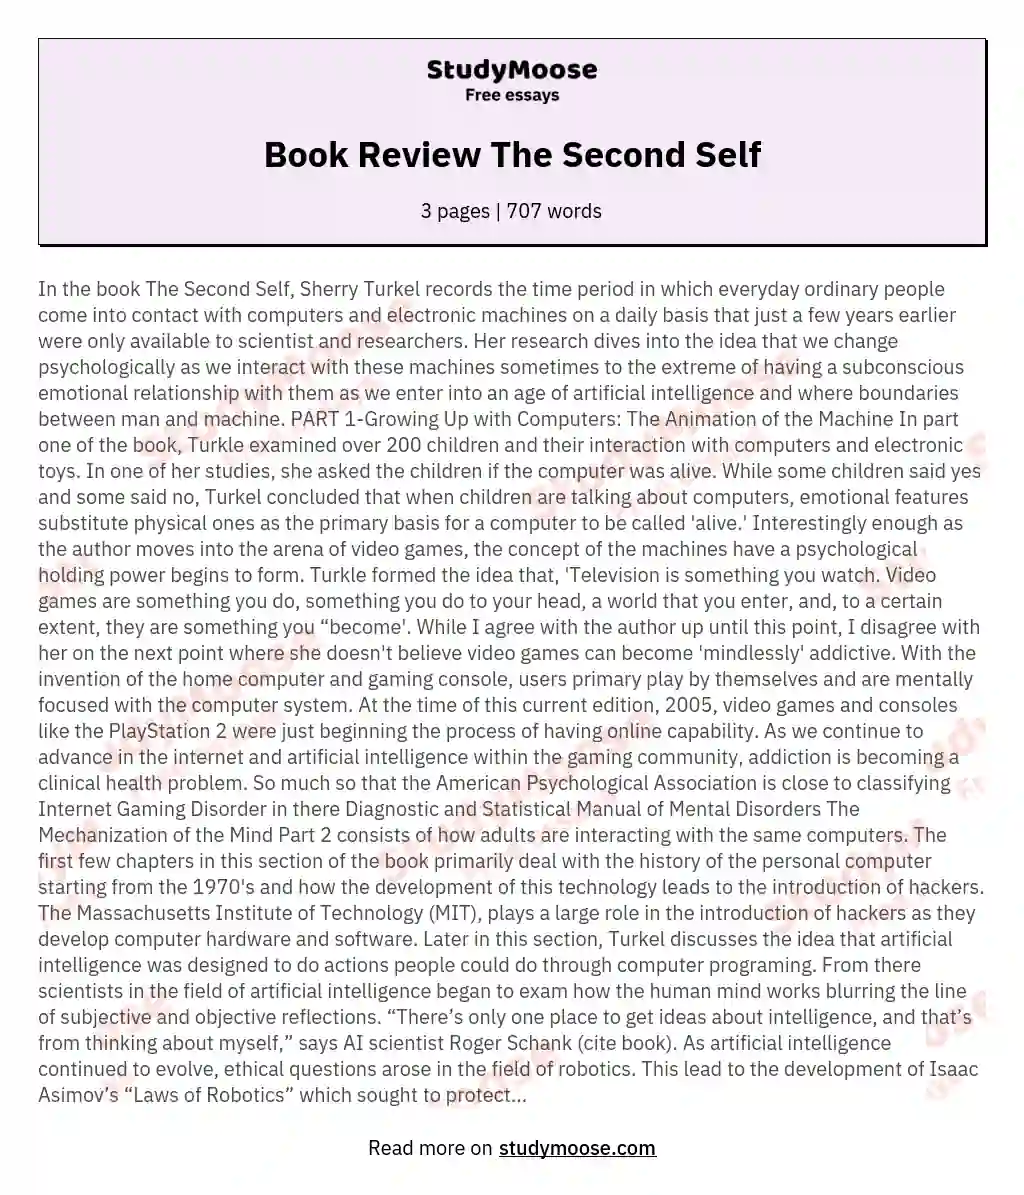 Book Review The Second Self essay